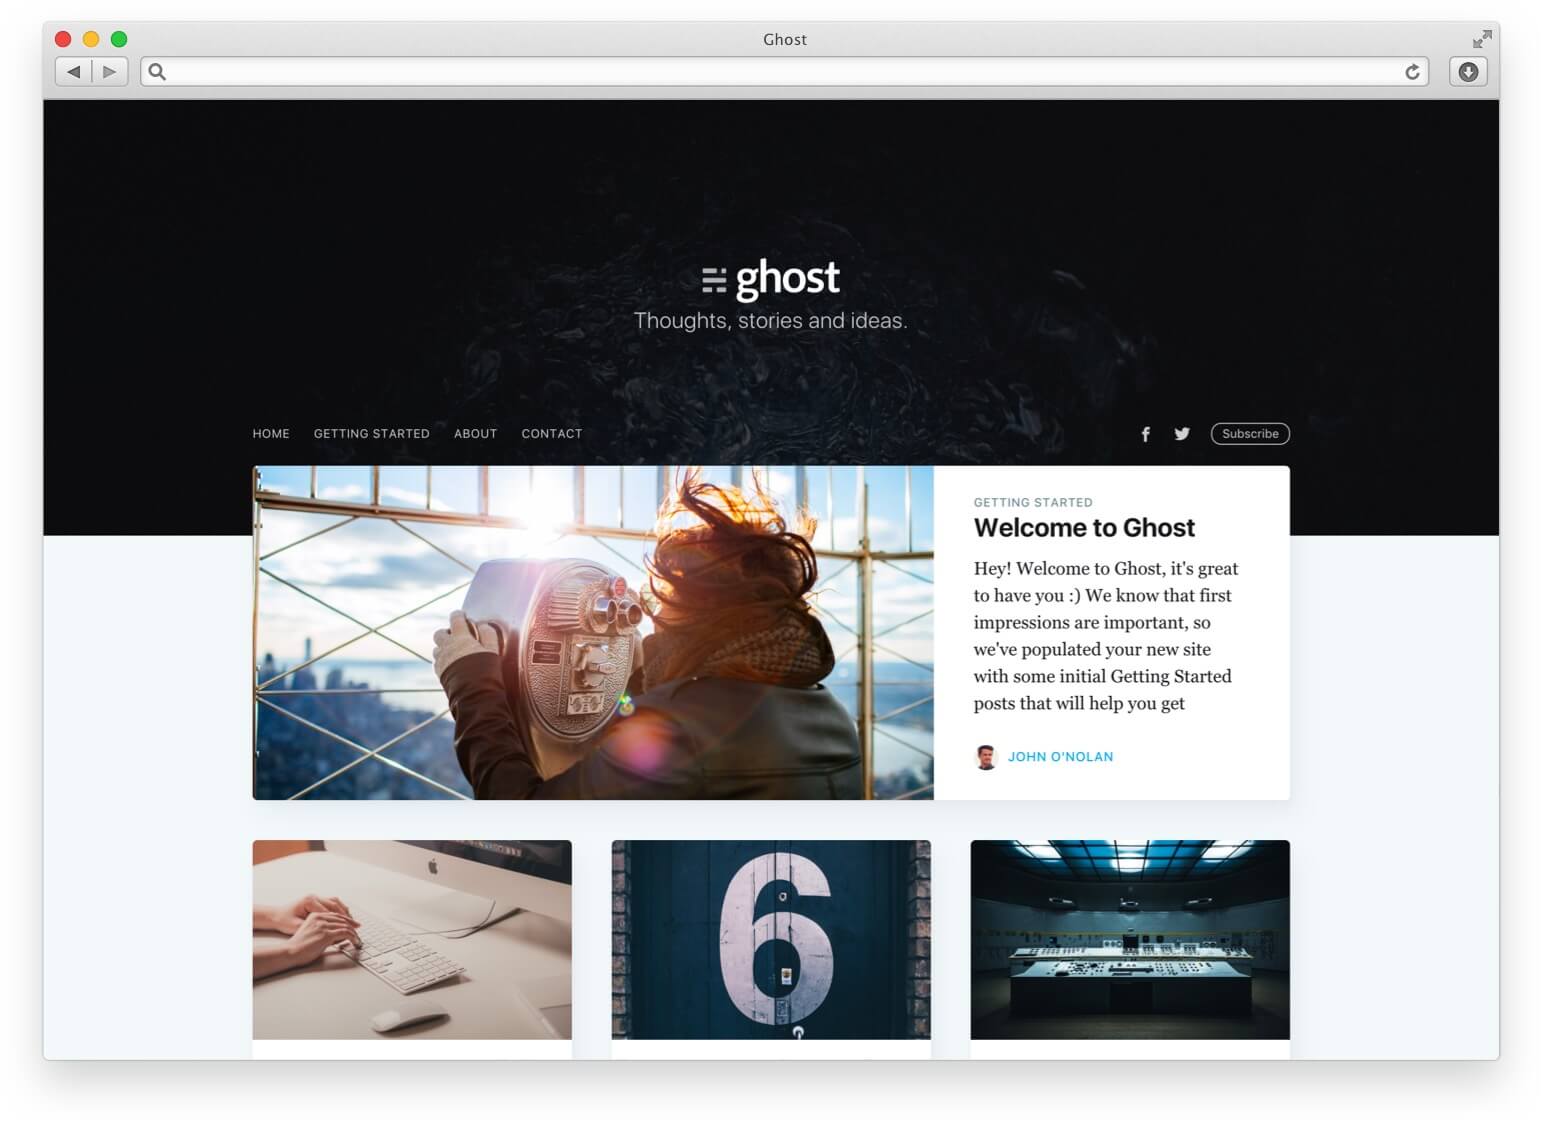 Ghost: A minimalist and open-source blogging platform.
Tumblr: A microblogging platform with a strong social media aspect.